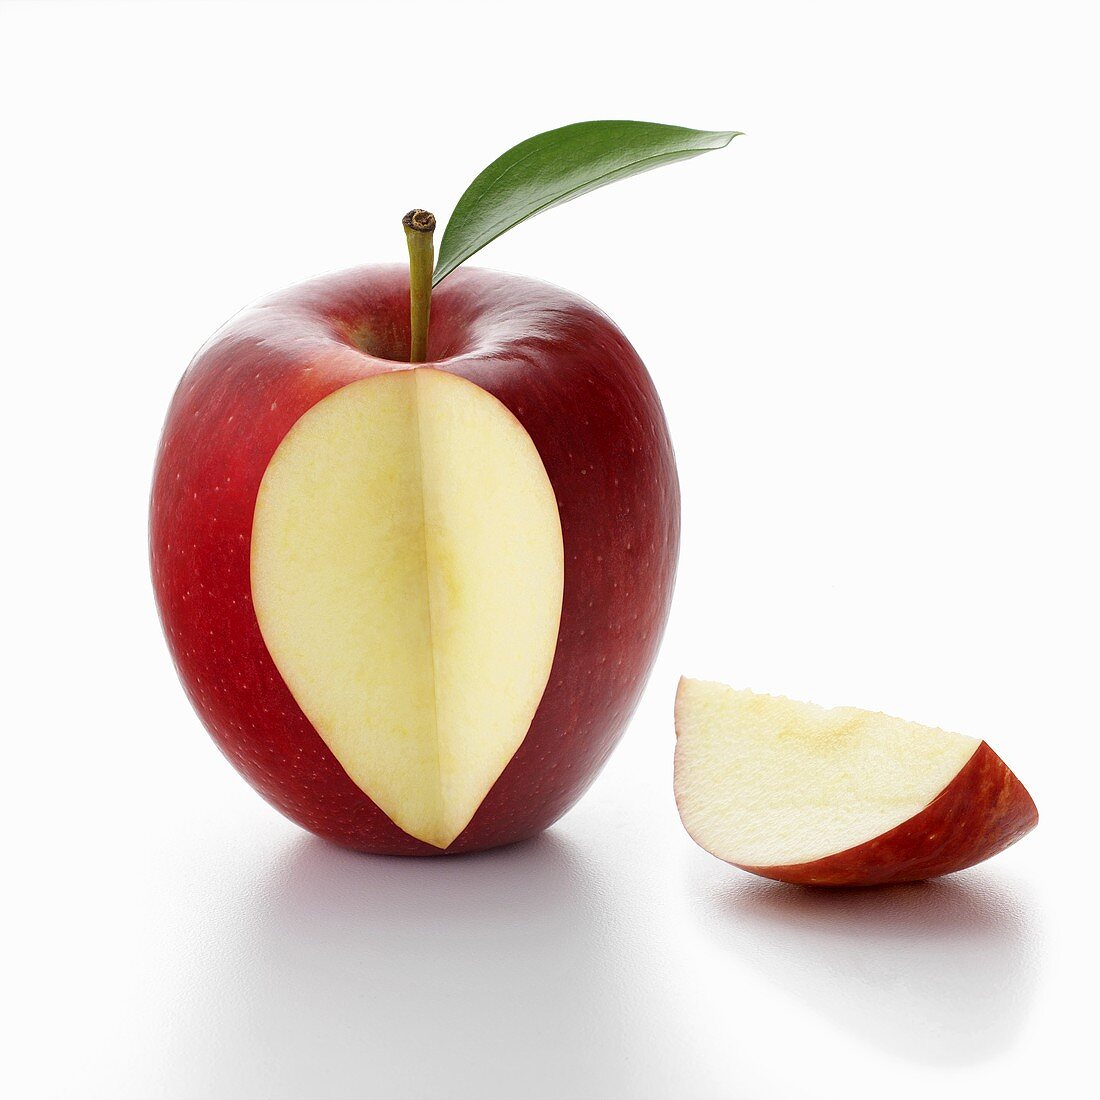 A red apple with a piece cut out